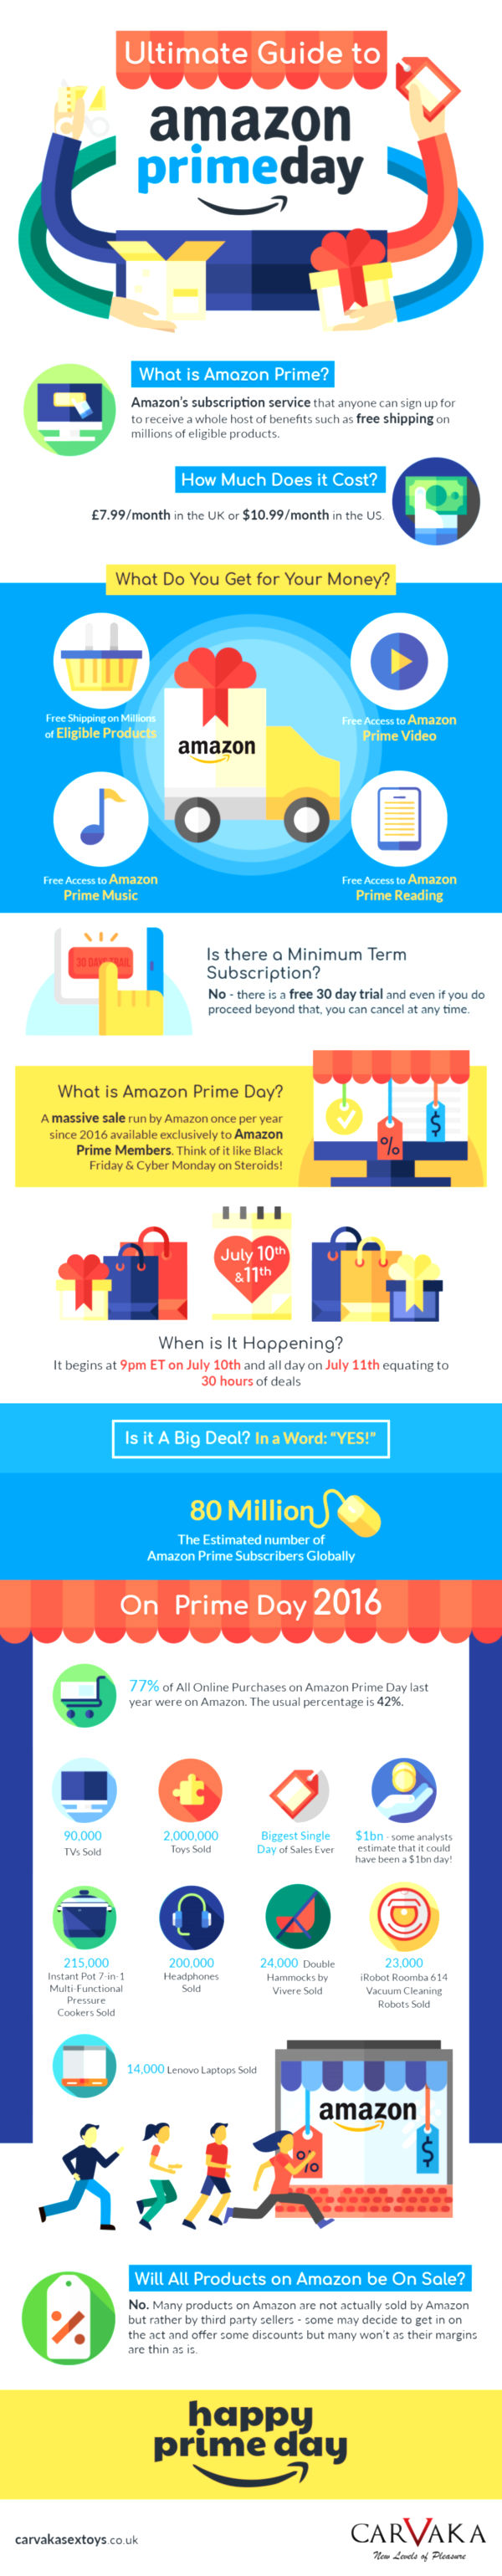 Will Amazon Prime Day 2017 hit $1bn in Sales in a Single Day? Get the Answer here! 1